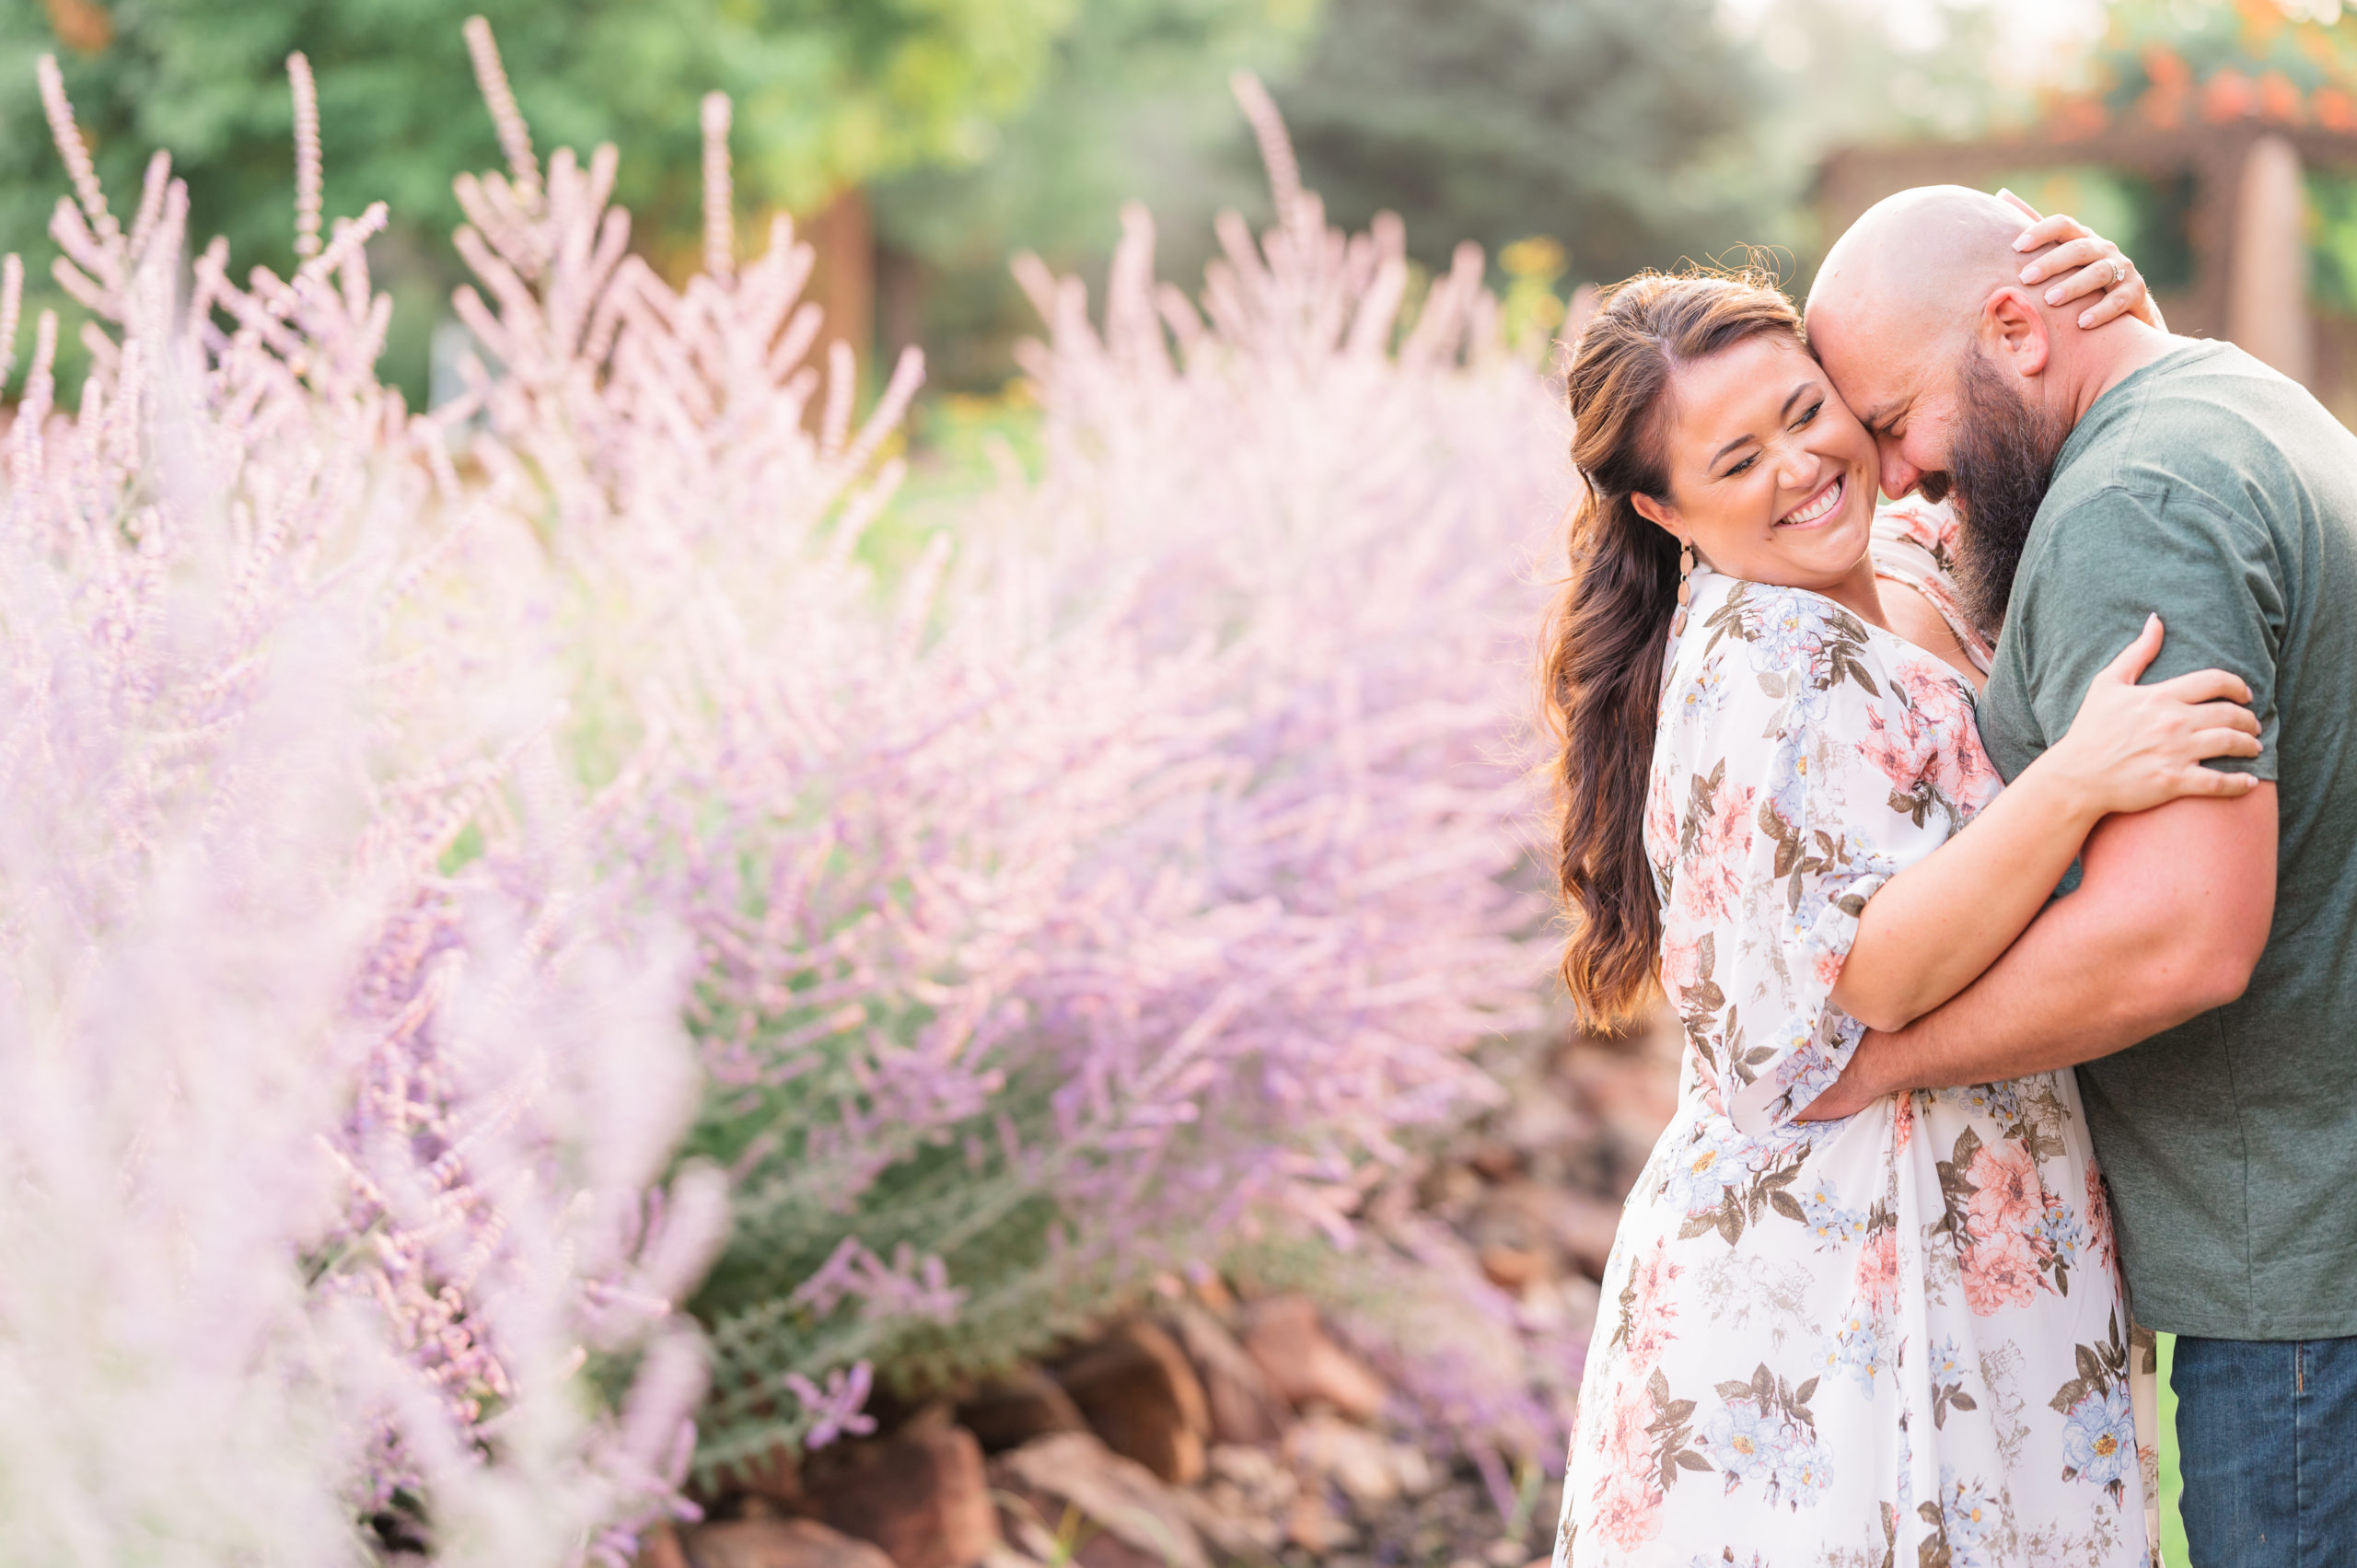 Sunset Engagement at The Hillside Vineyard in Fort Collins | Britni Girard Photography | Destination Colorado Wedding Photographer and Videographer | Strolling along a mountain Stream in flowy white floral dress